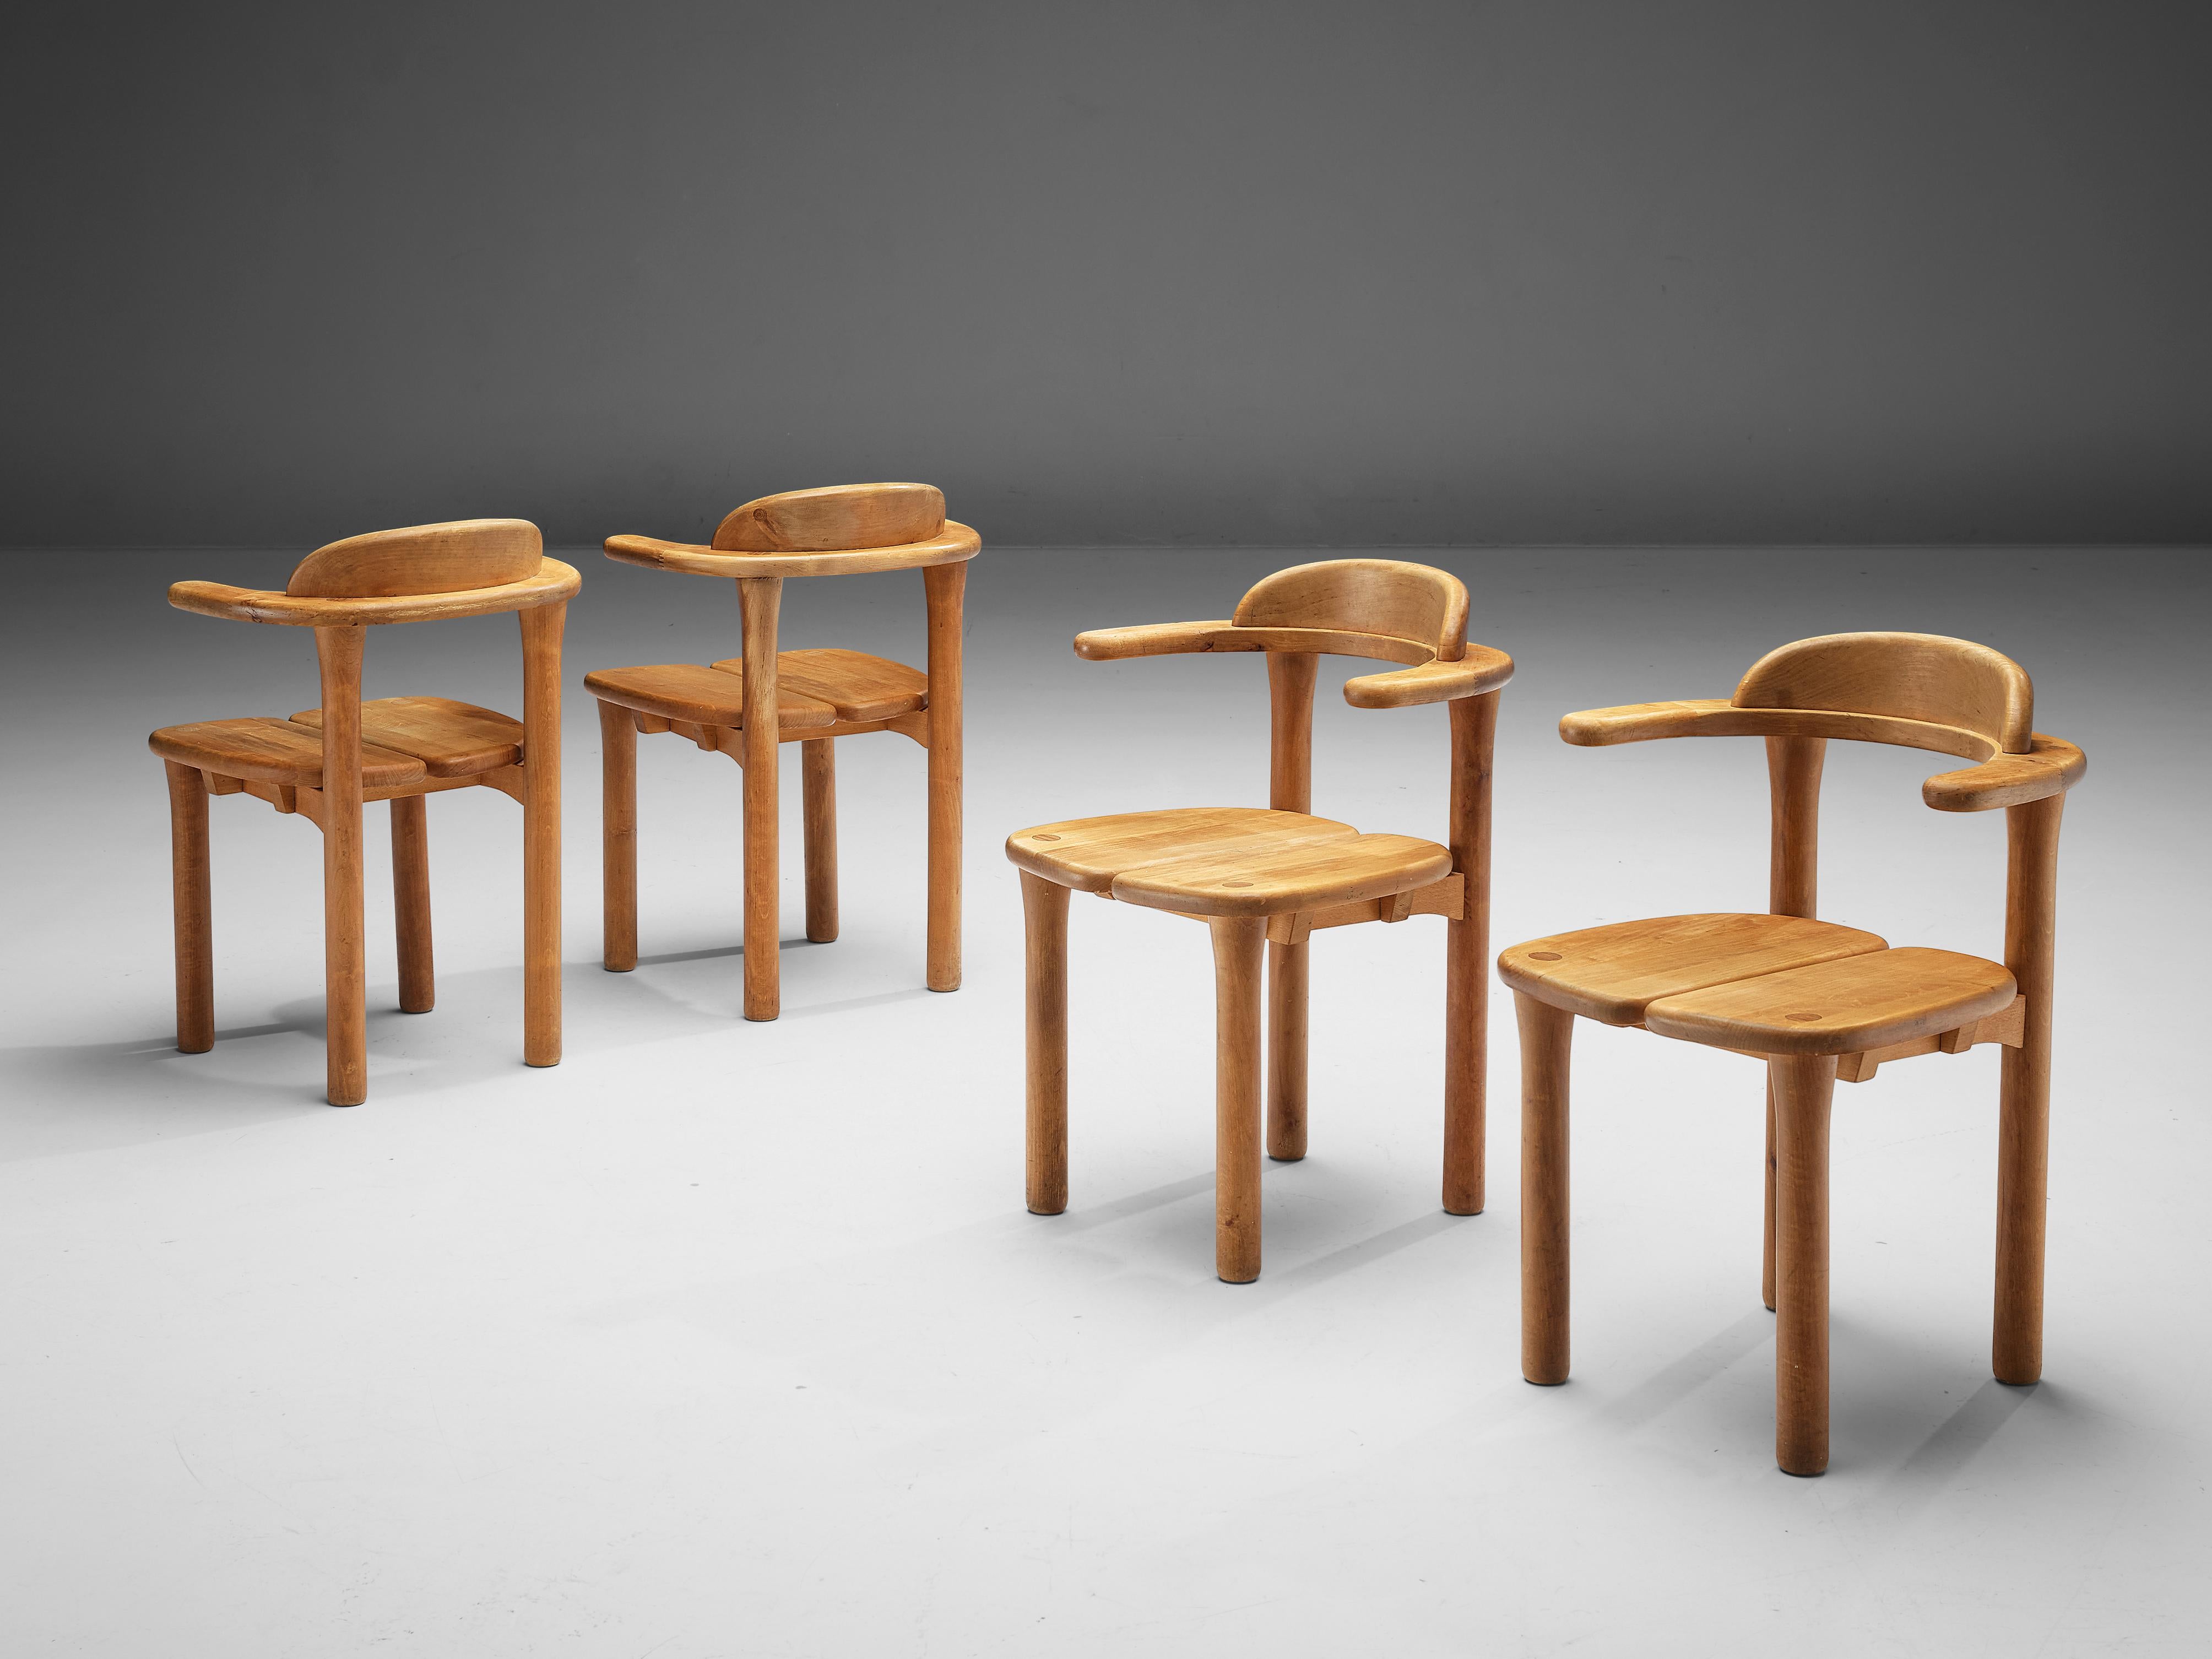 Dining chairs, birch, Sweden, circa 1960s

This set of four chairs in birch features a sturdy back with short armrests. The seating consists of two slats and is detailed with wood-joints. Due the composition of different elements these chairs get a